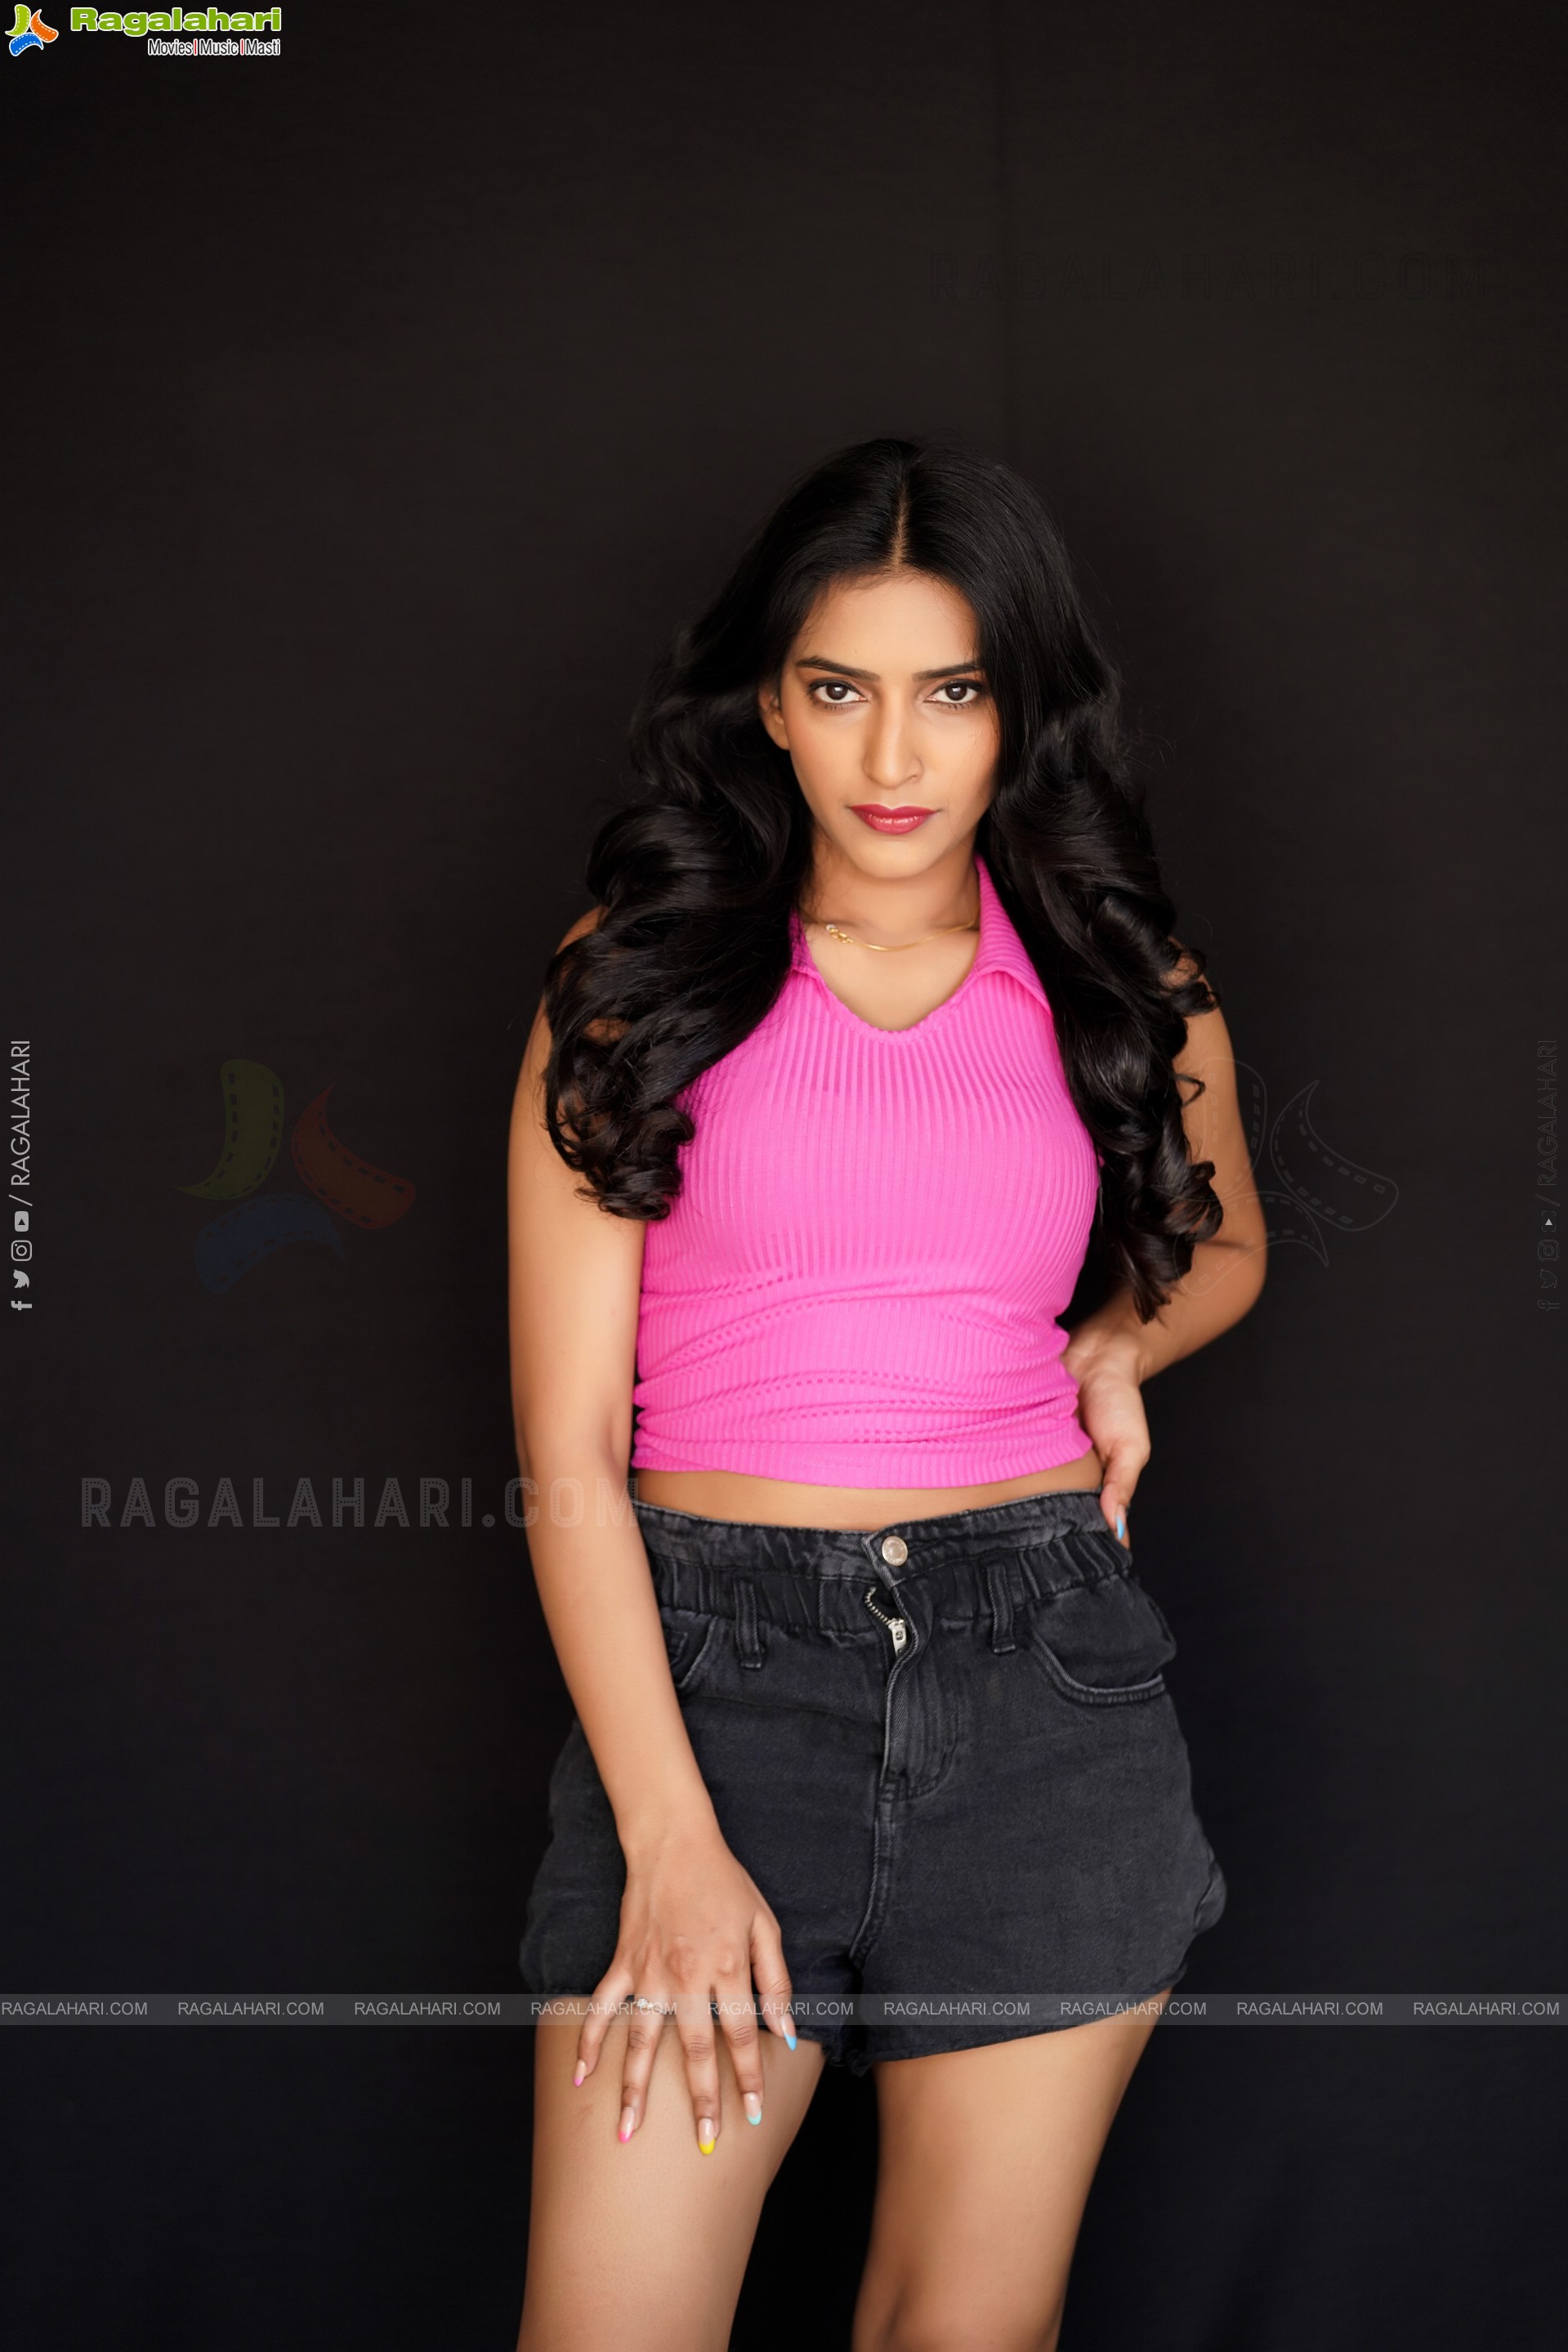 Nikita Gangurde in Pink Knitted Top and Black Shorts, Exclusive Photoshoot